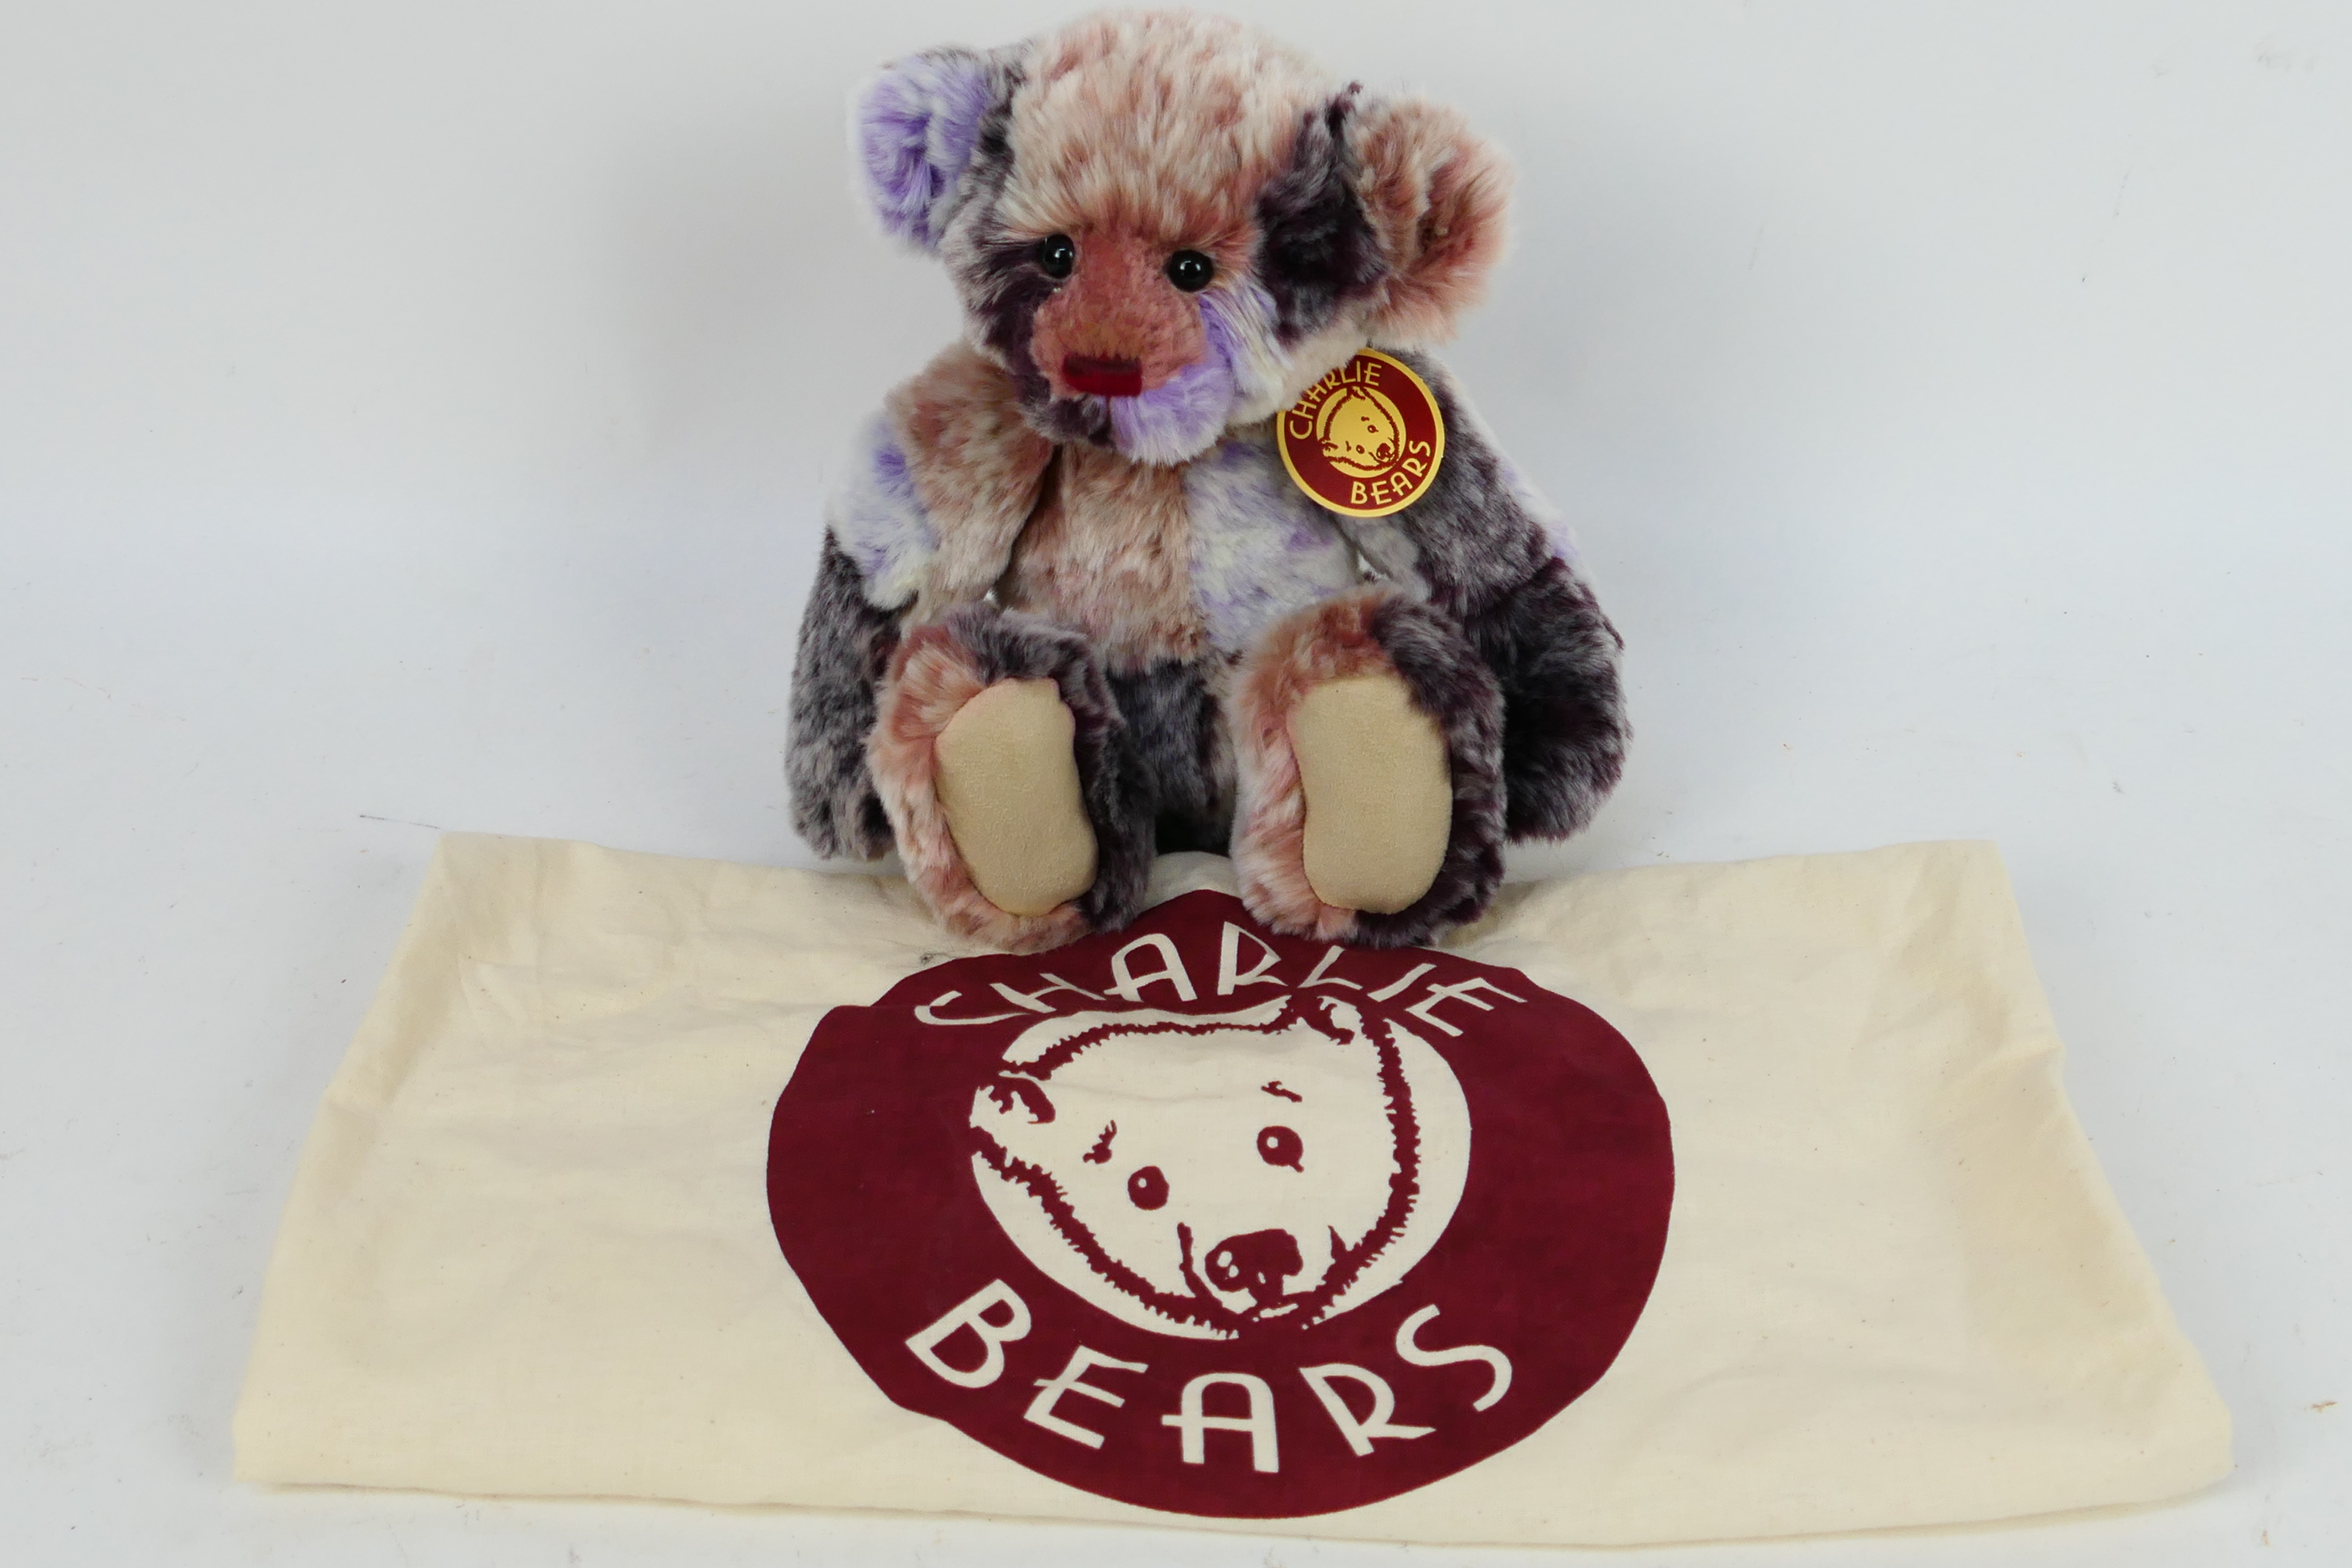 Charlie Bears - A Charlie Bears soft toy teddy bear #CB604748C 'Ragsy', designed by Isabelle Lee,